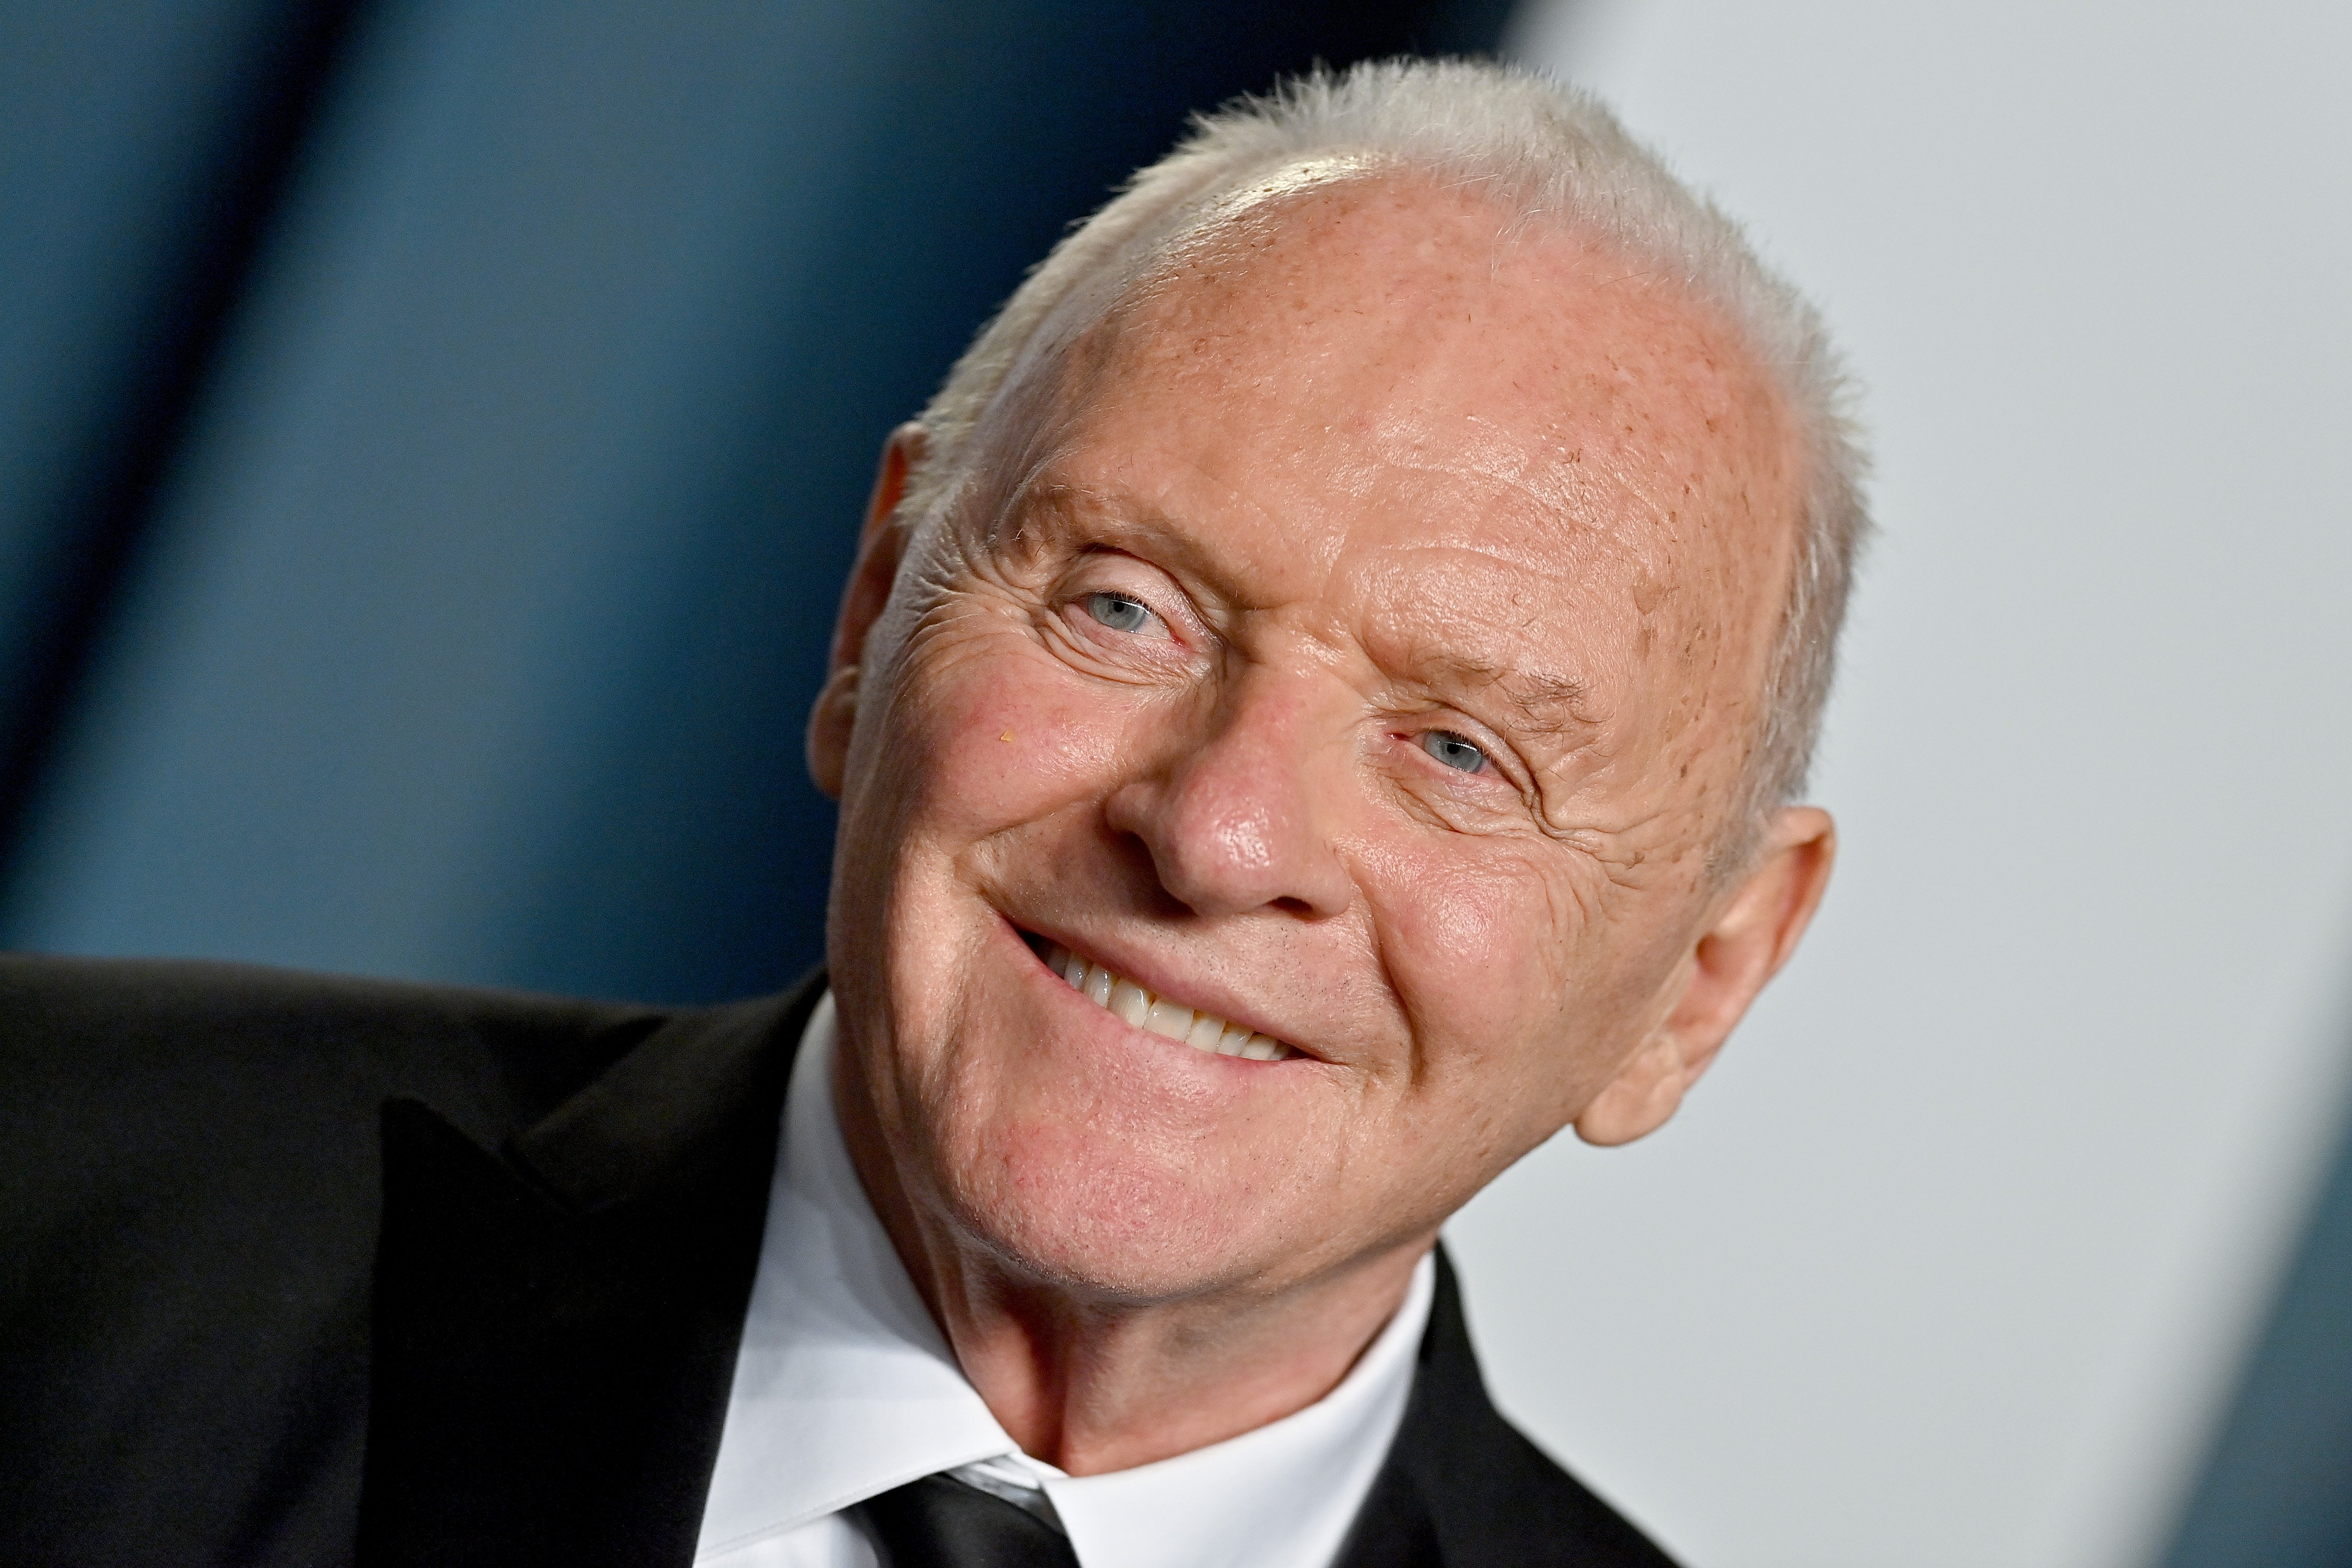 Actor Anthony Hopkins attending the 2022 Vanity Fair Oscar Party at Wallis Annenberg Center for the Performing Arts on March 27, 2022 in Beverly Hills, California.┃Source: Getty Images